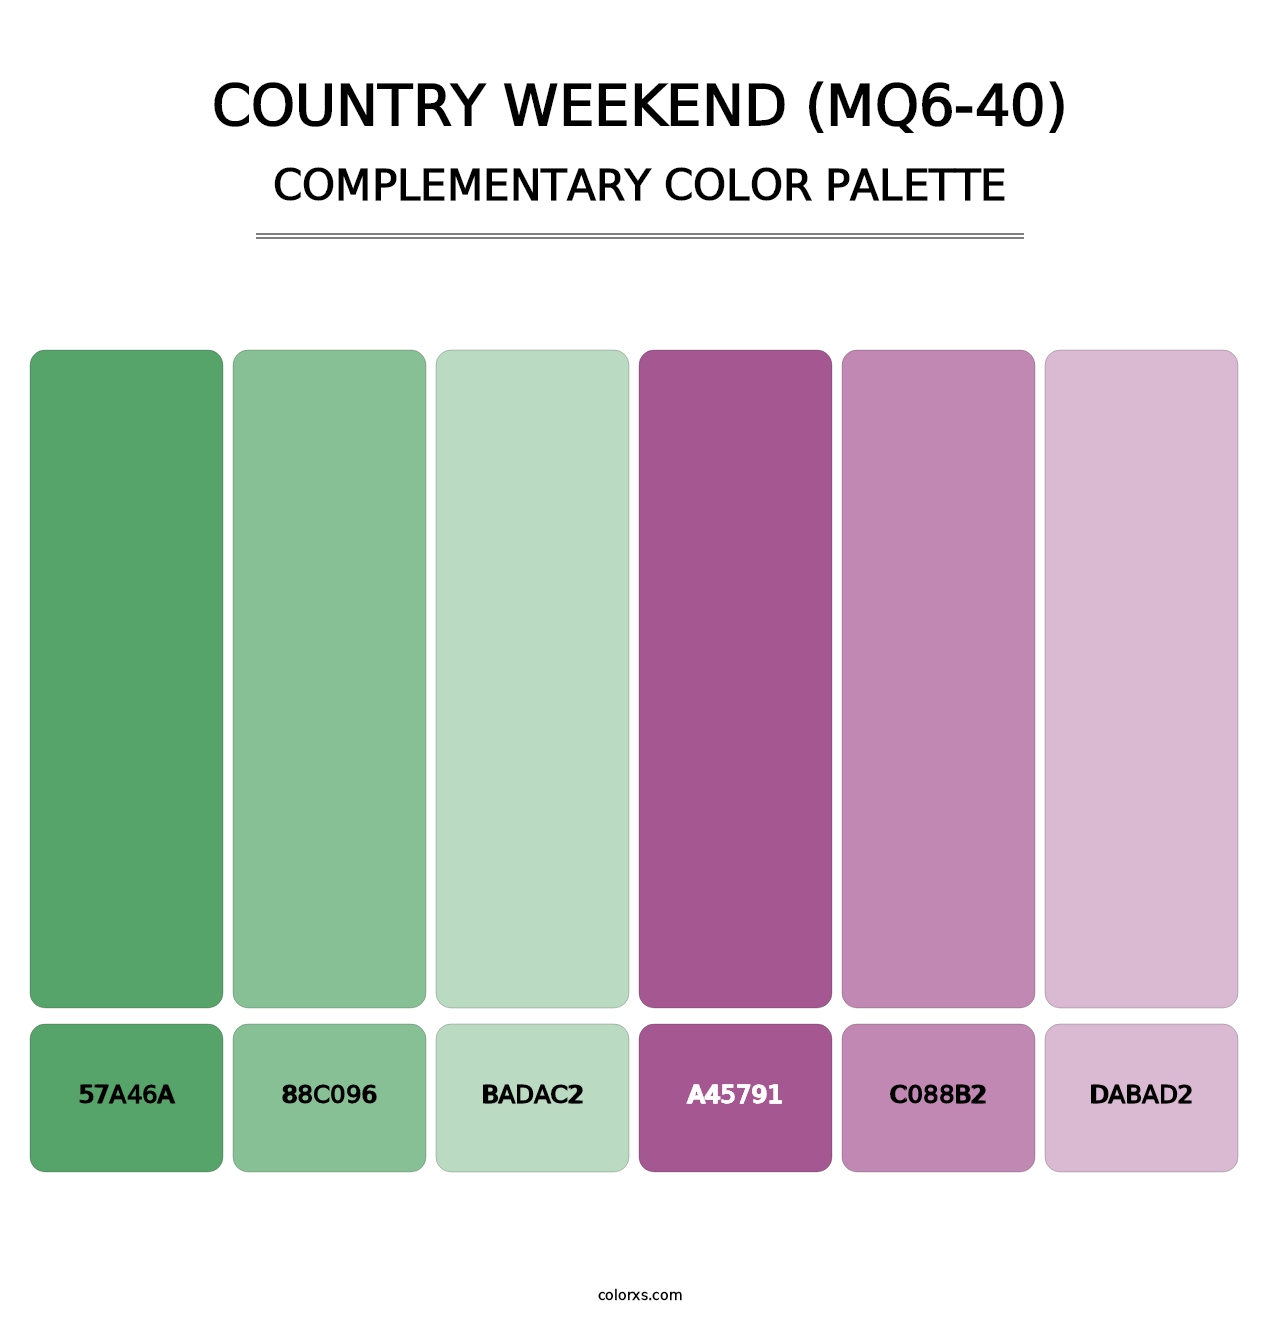 Country Weekend (MQ6-40) - Complementary Color Palette